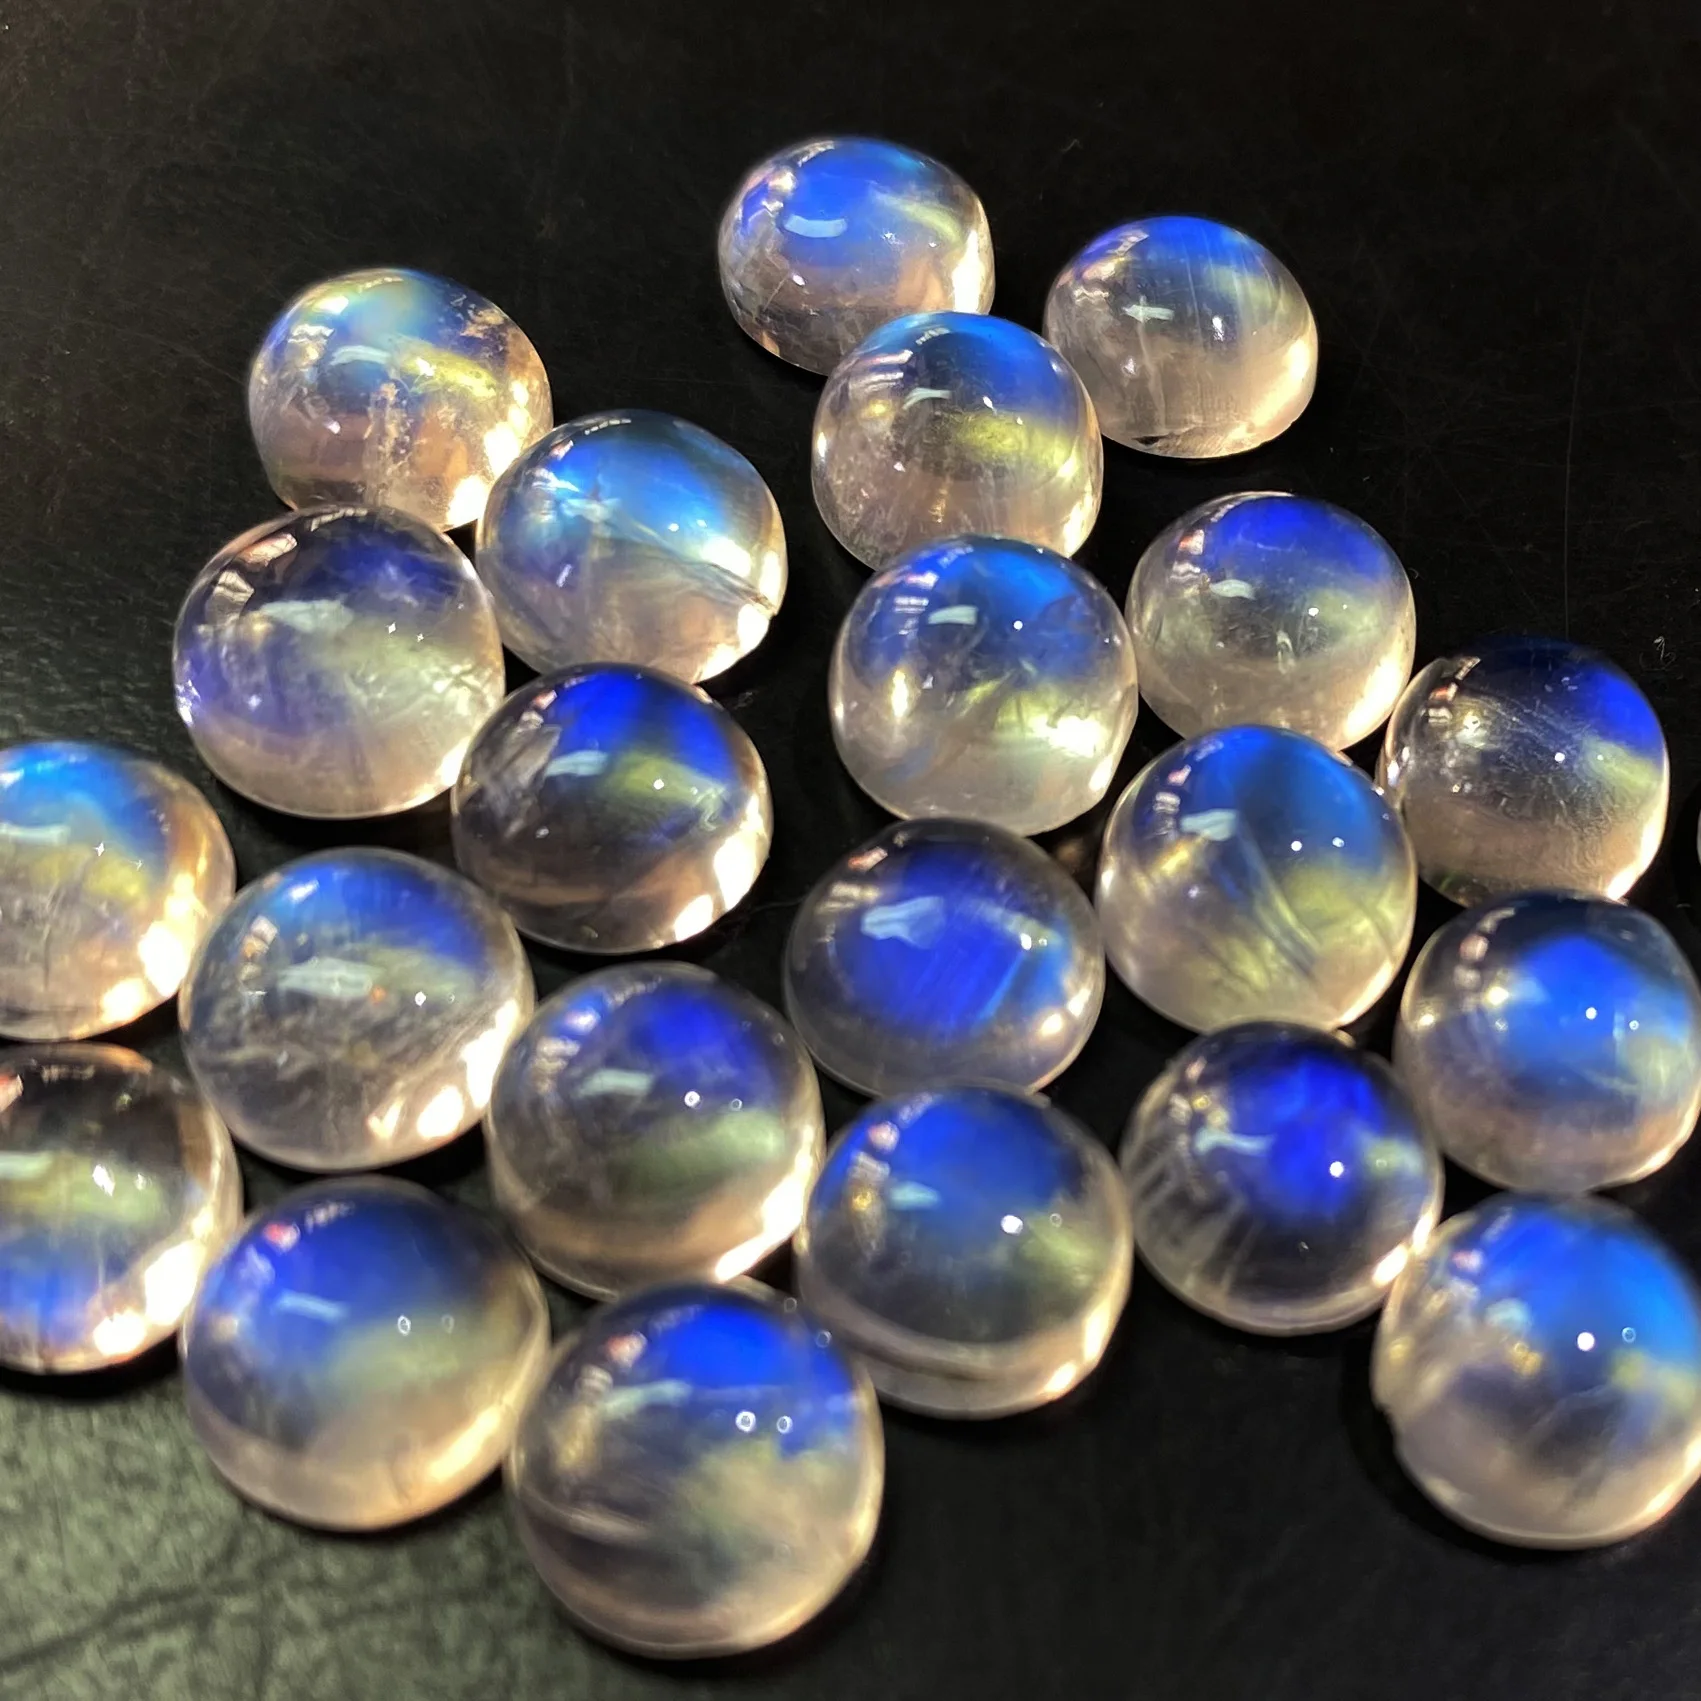 LARGE 15mm ROUND CABOCHON-CUT NATURAL INDIAN RAINBOW MOONSTONE GEM 